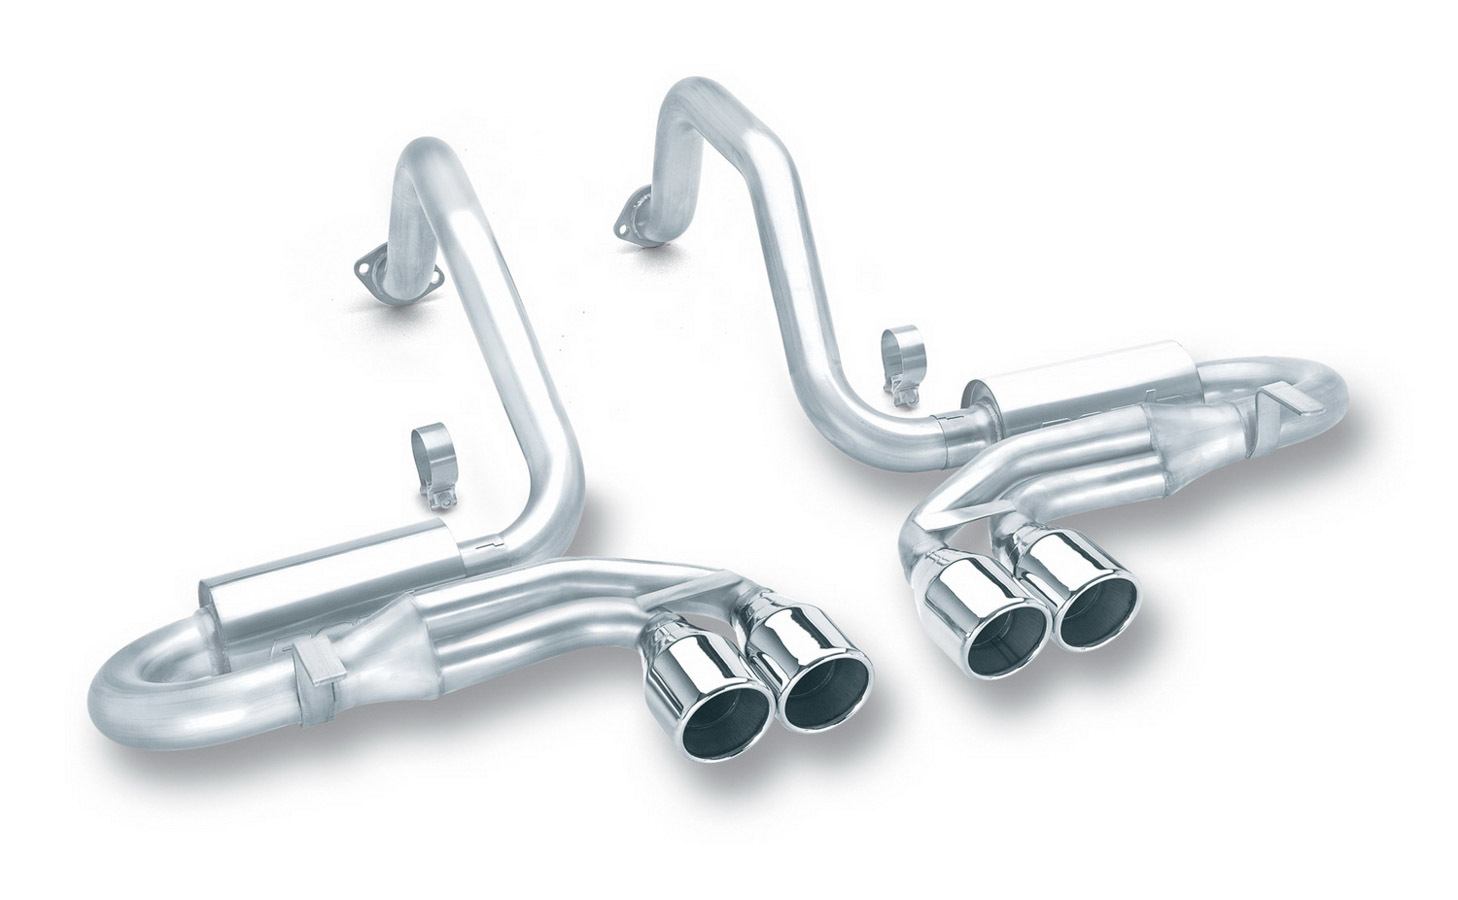 Borla Exhaust System, S-Type, Cat-Back, 2-1/2" Intermediate Pipe, 2" Tailpipe, Dual/Dual Tips, Stainless, Natural, C